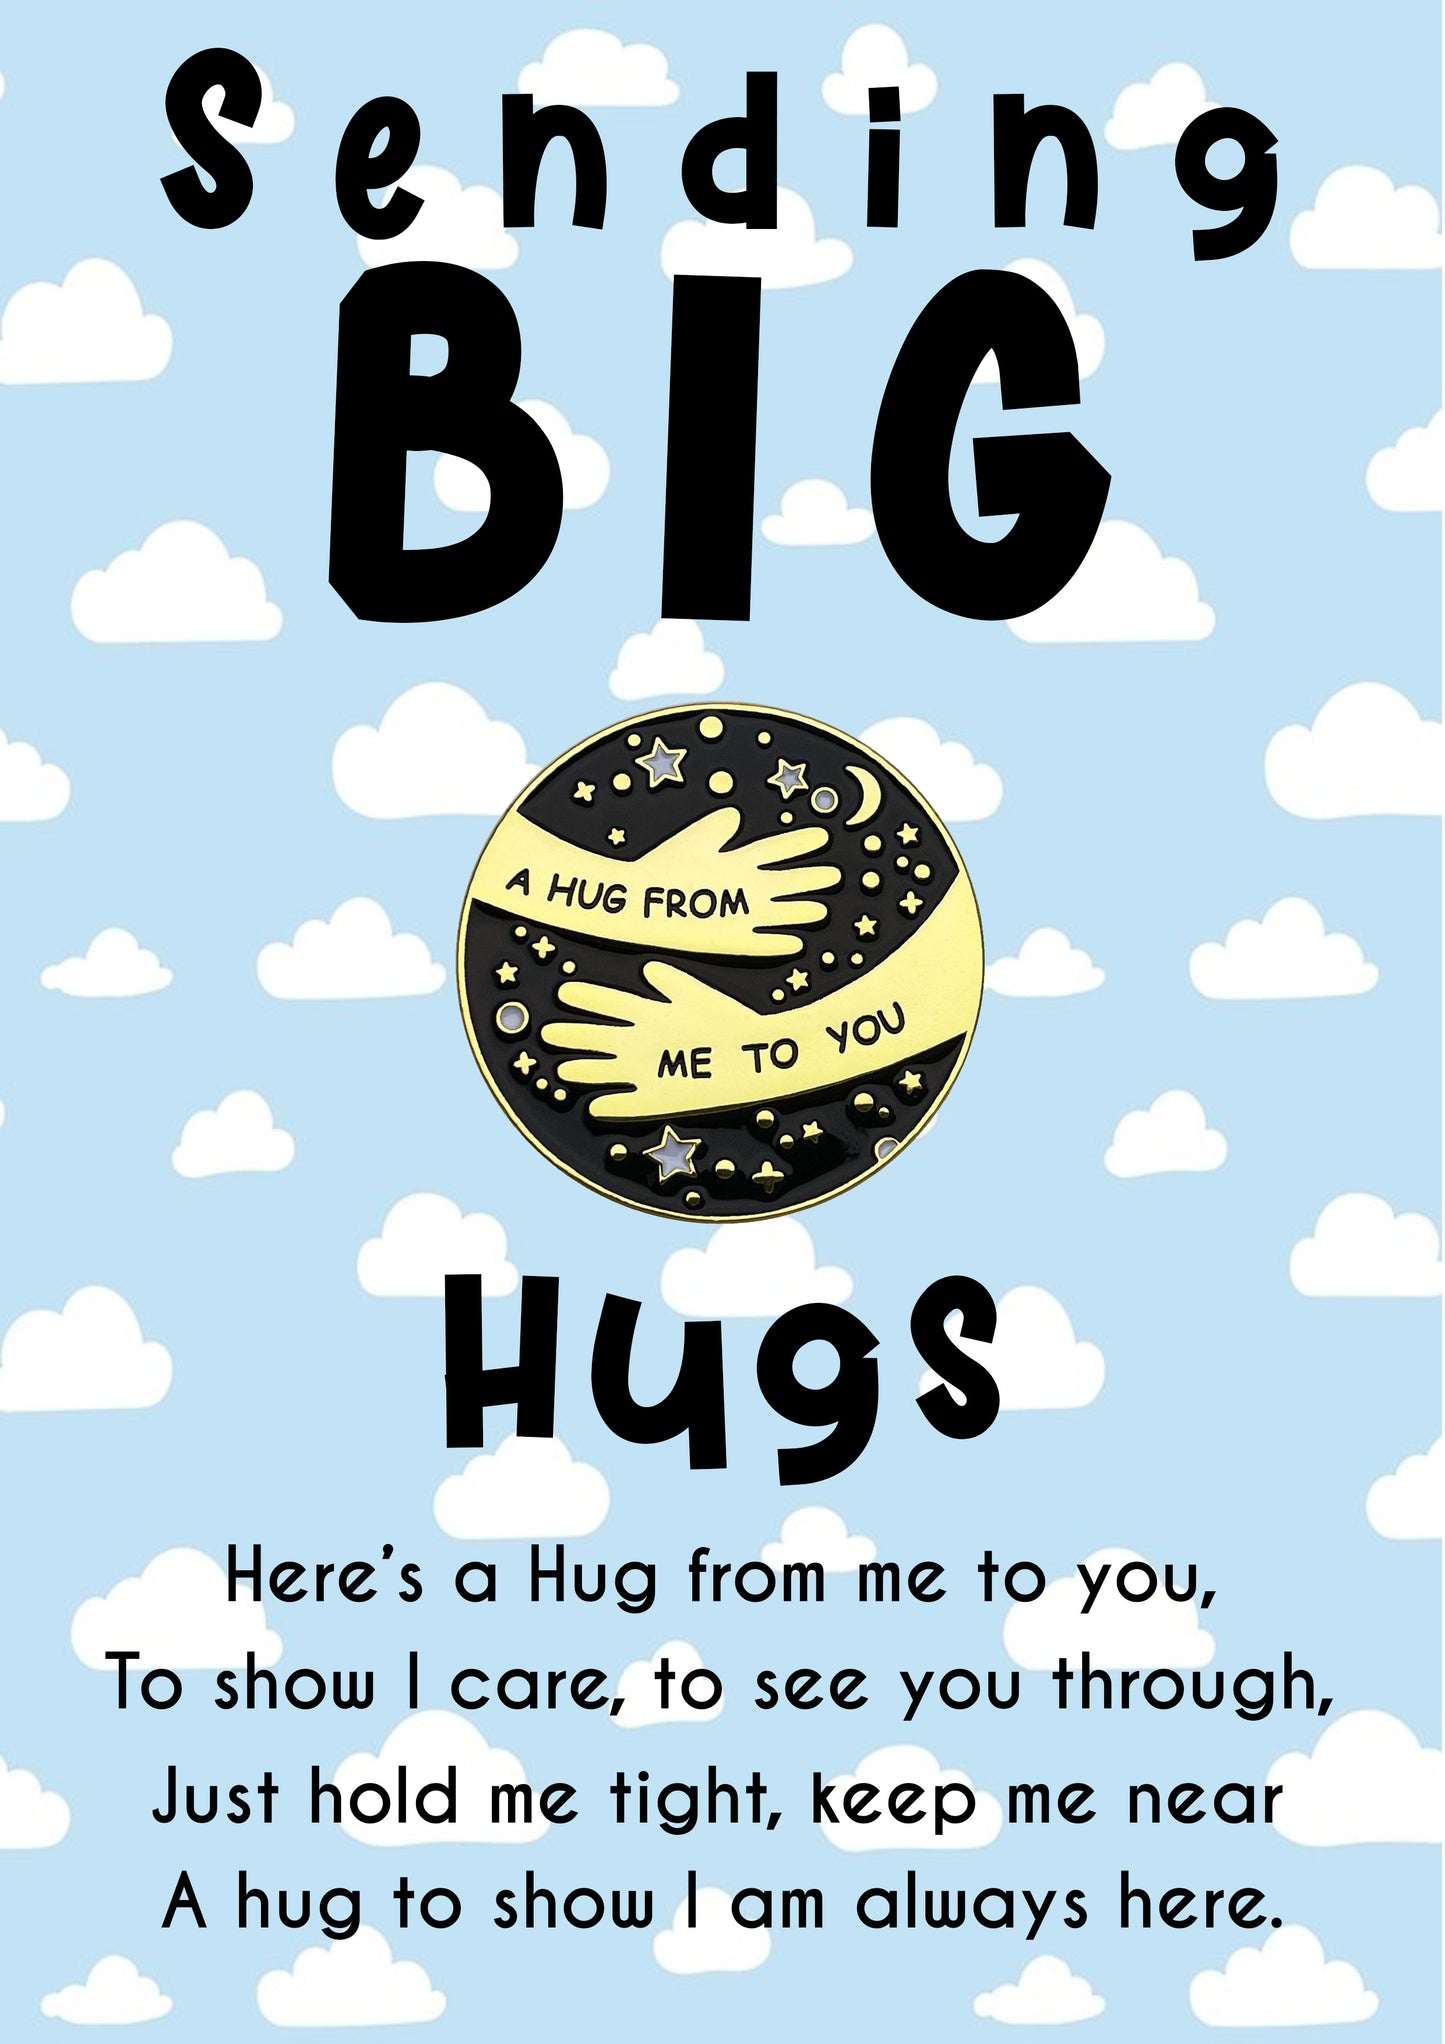 Sending Big Hugs Pin Badges With Personalised Blue Sky & Cloud Message Cards